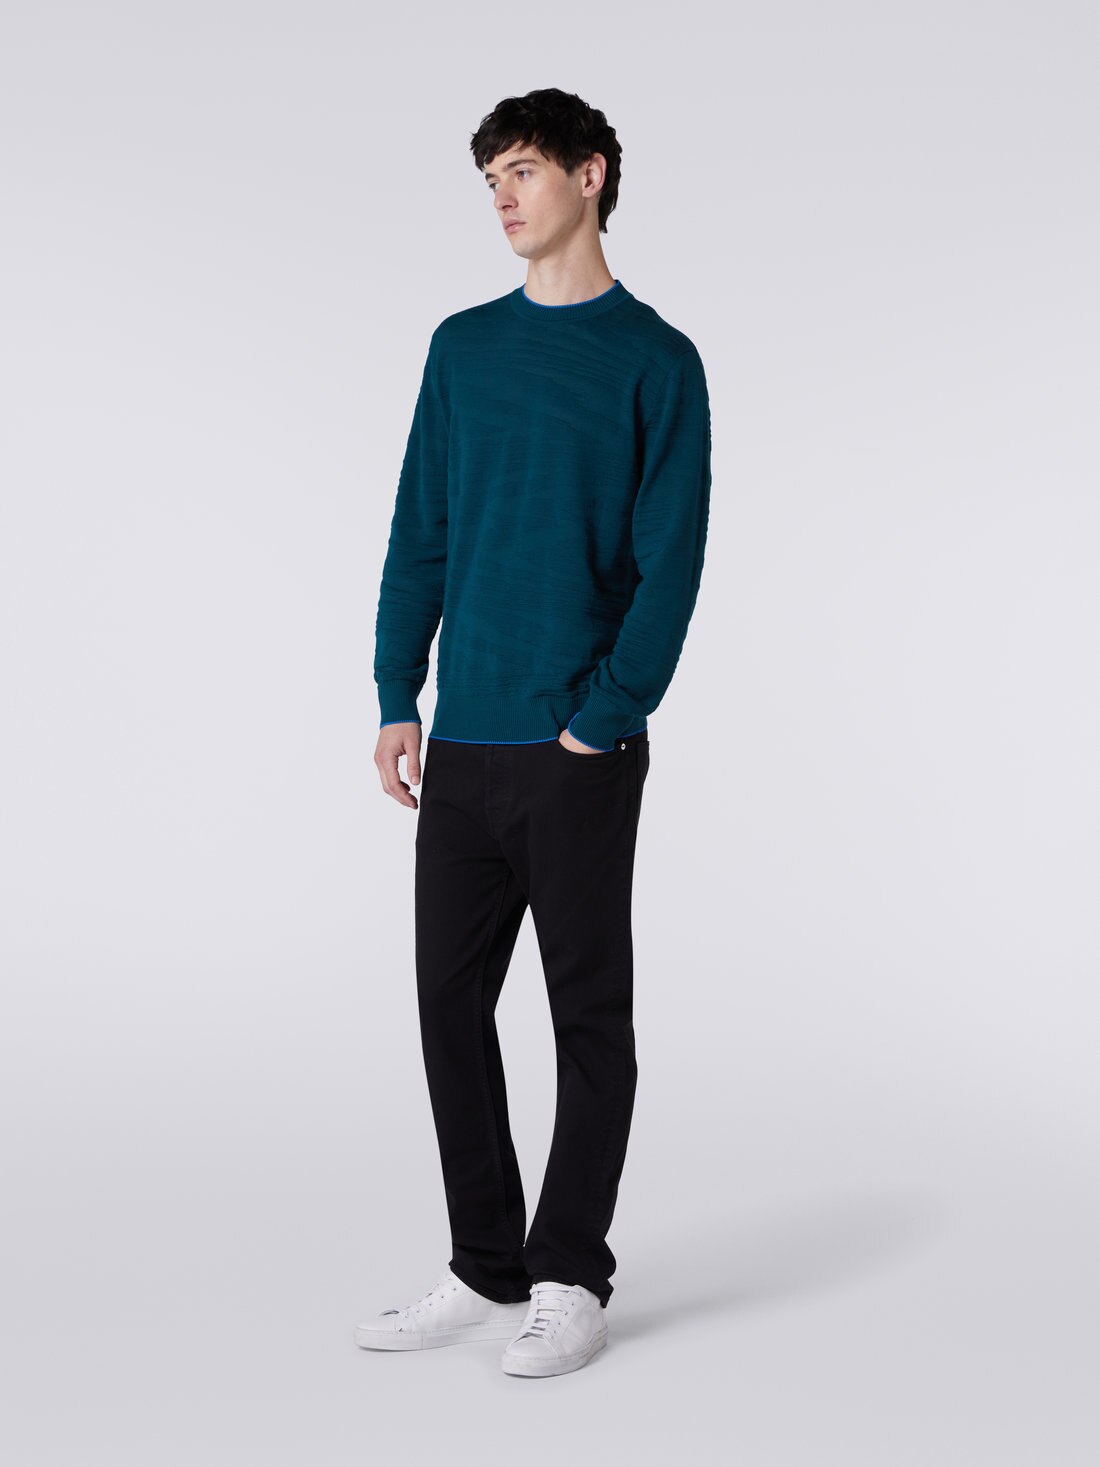 Embossed wool and viscose crew-neck pullover, Green  - UC23WN02BK021ZS611Q - 2